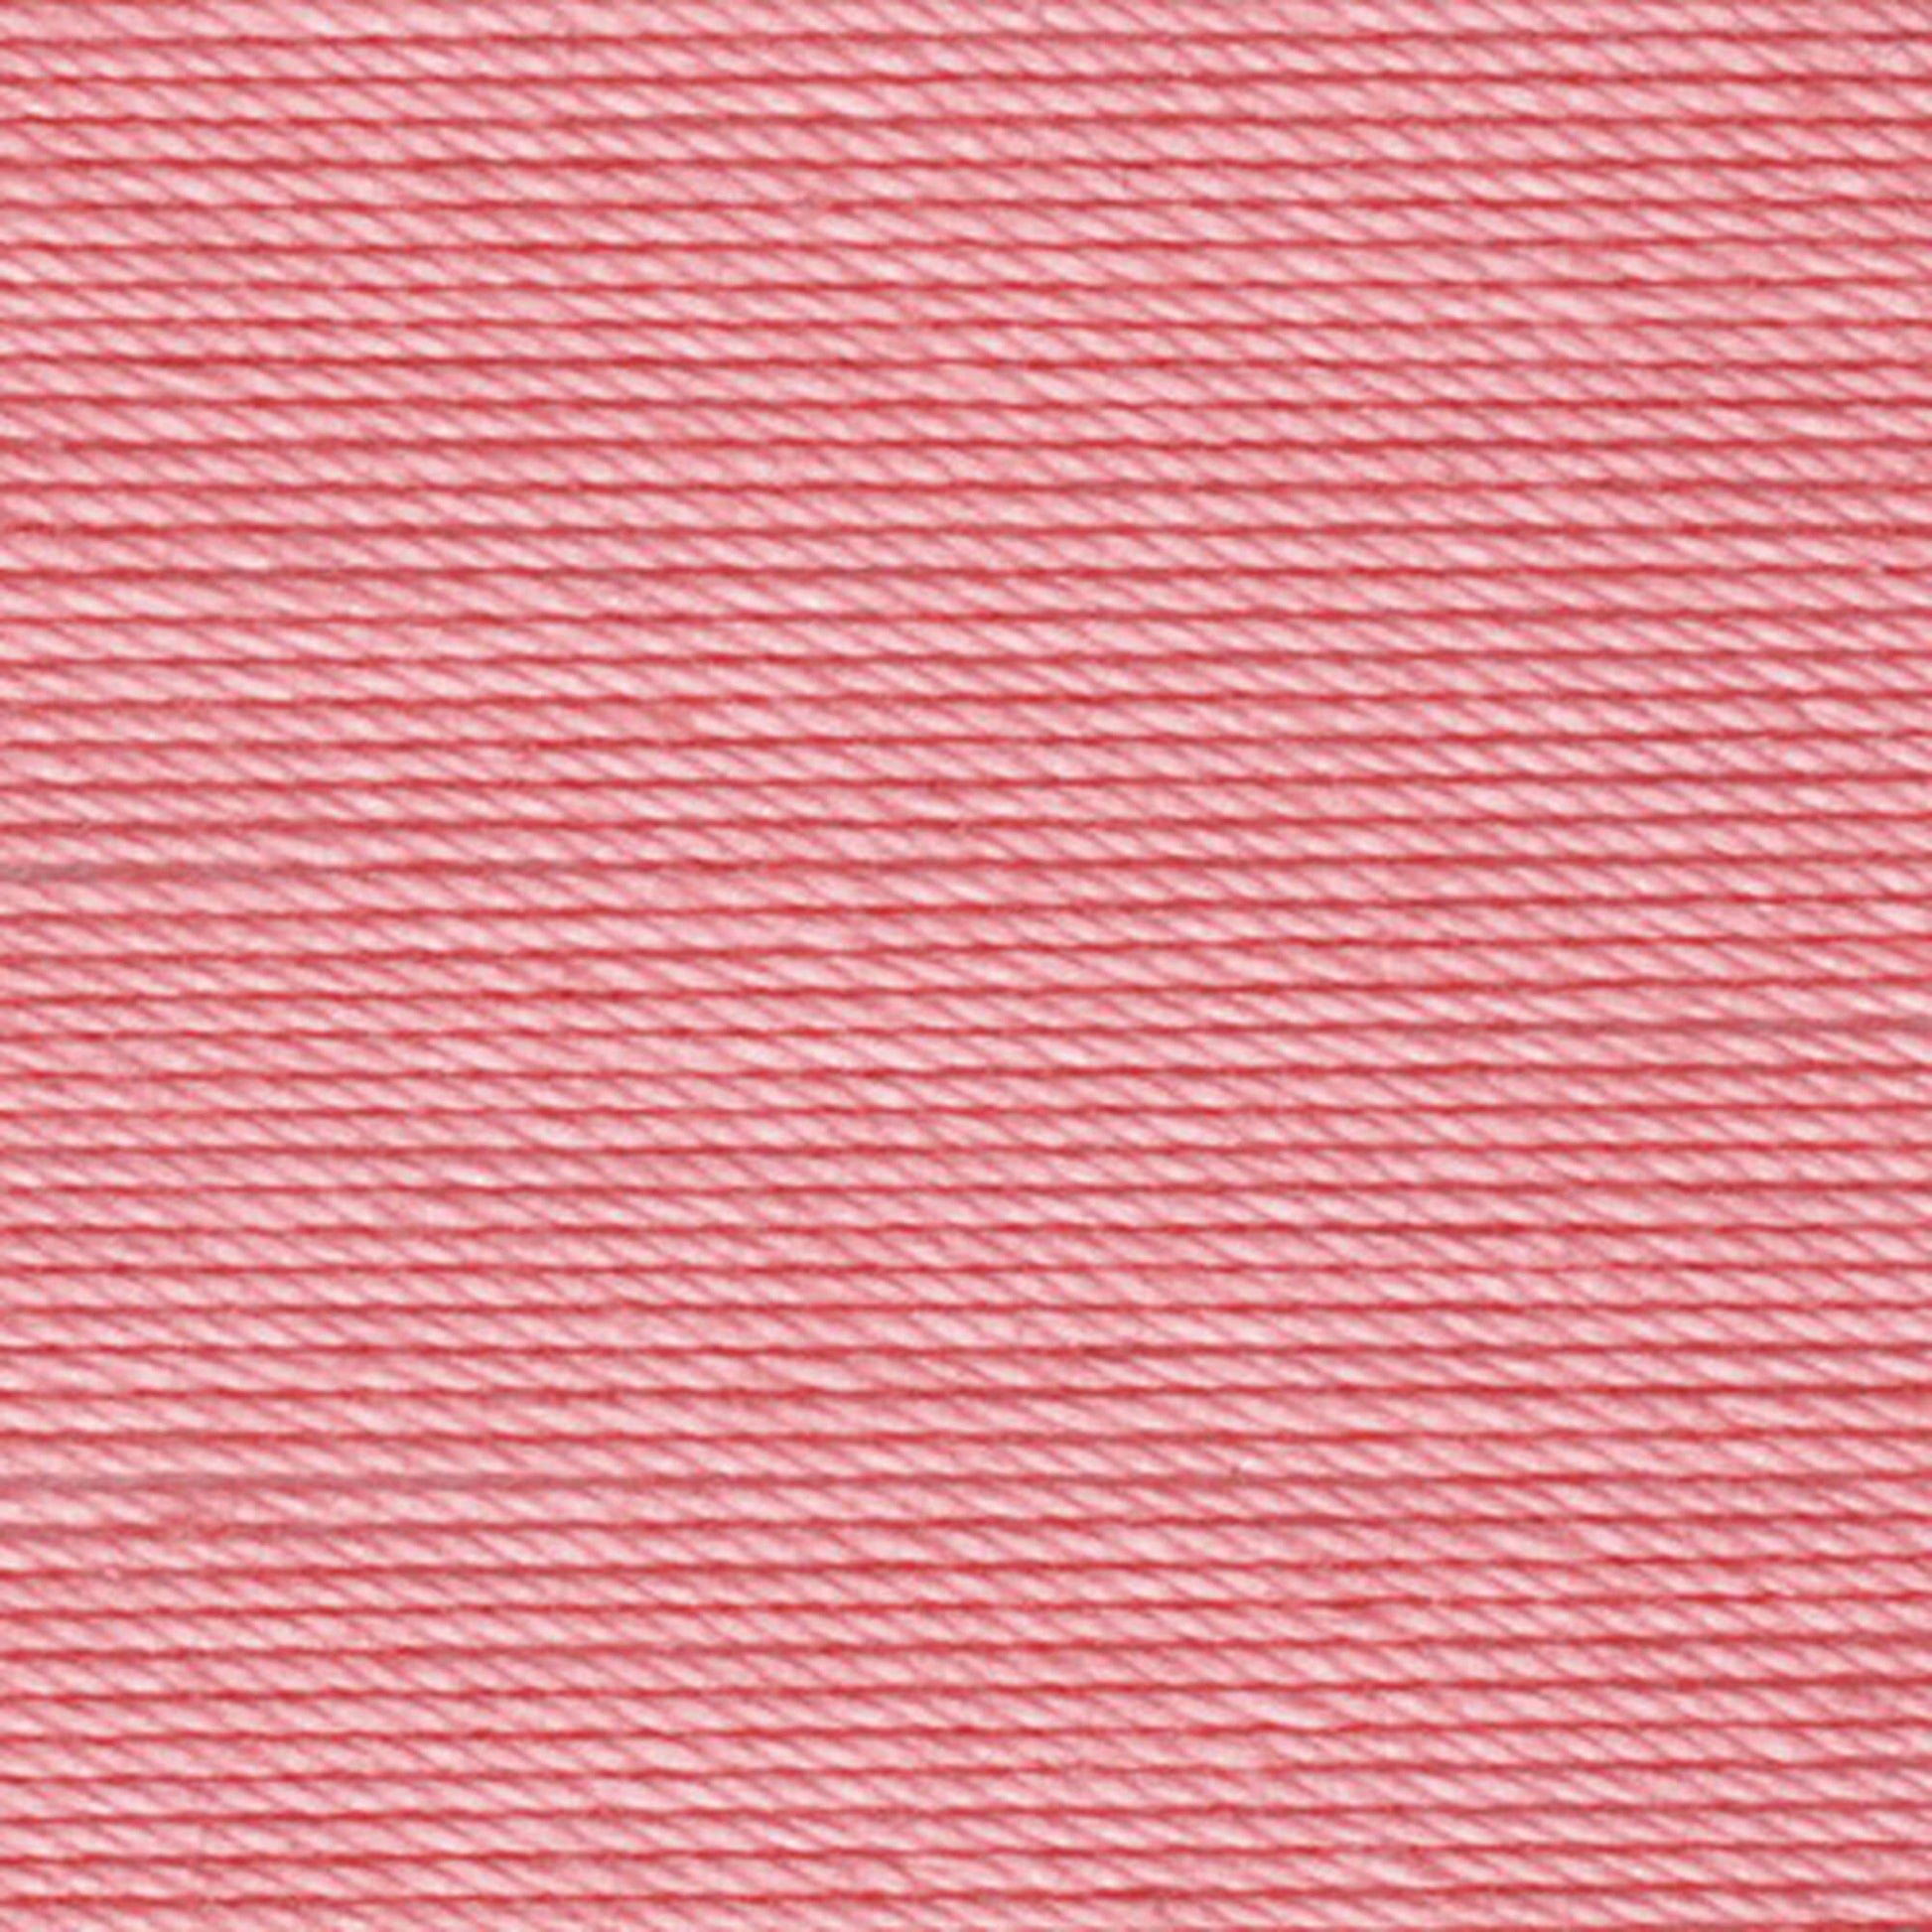 Aunt Lydia's Classic Crochet Thread Size 10 - Clearance shades Coral